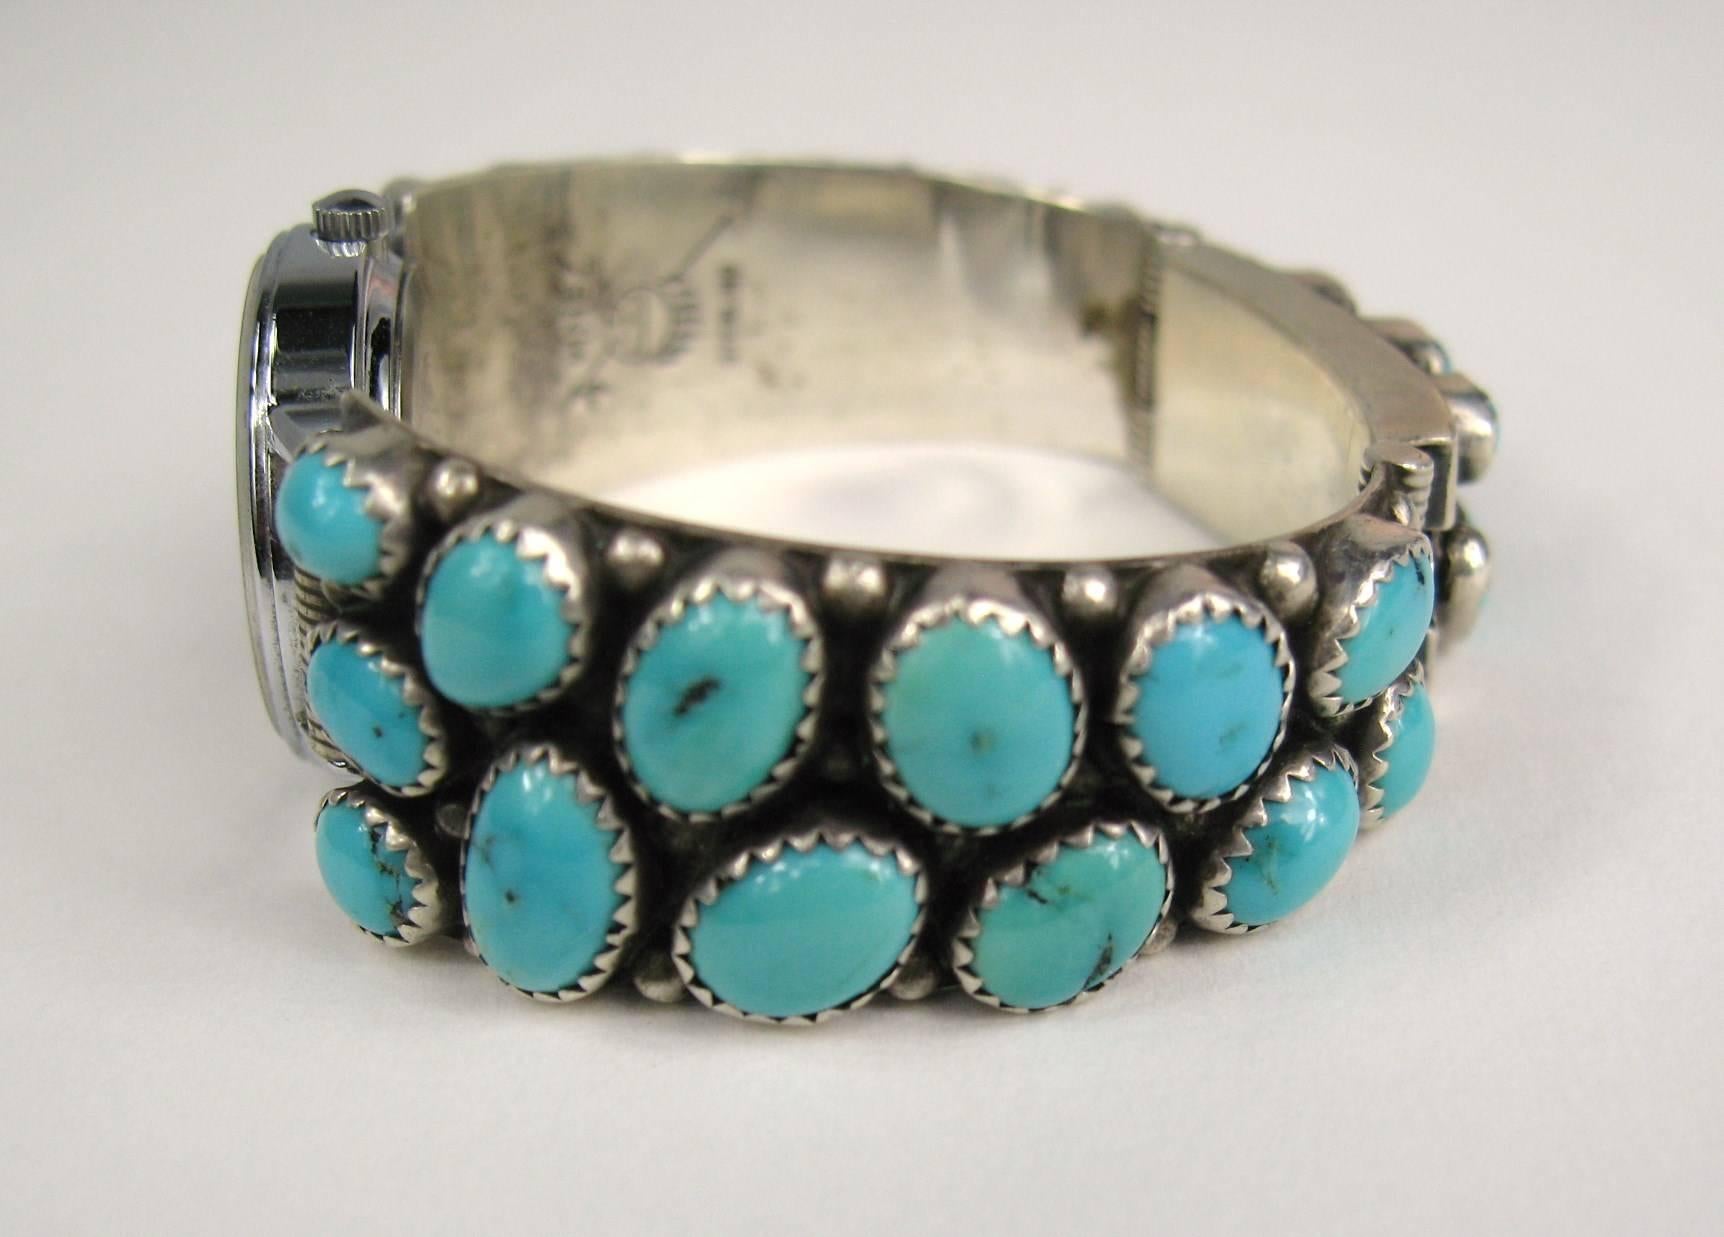 This Native American Sterling silver watch is covered in various size turquoise stones. Measuring .75 down to .50 on the band. We fit a size 6-6.25 inch wrist. Slide-in clasp closure in the back. This is out of a massive collection of Hopi, Zuni,